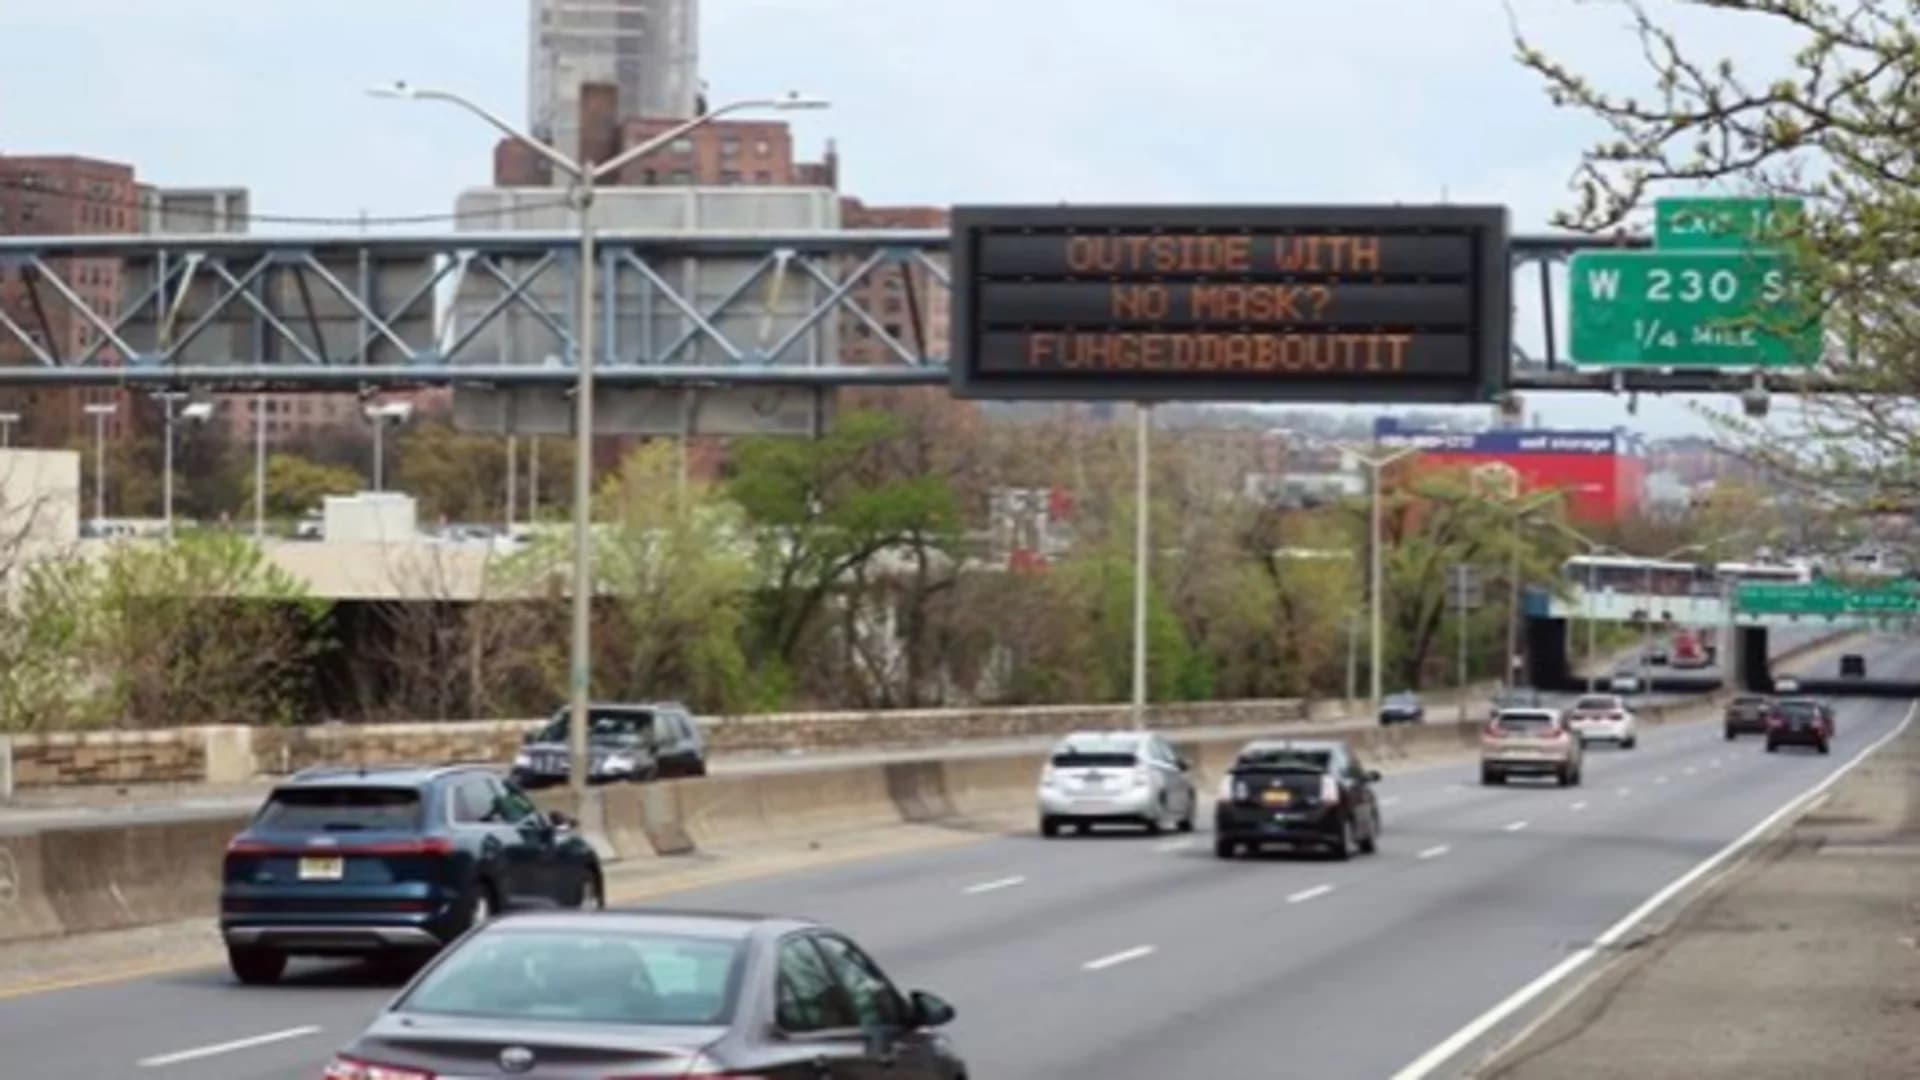 “No Mask? Fuhgeddaboutit”- I-87 sign offers COVID-19 reminder, NYC-style